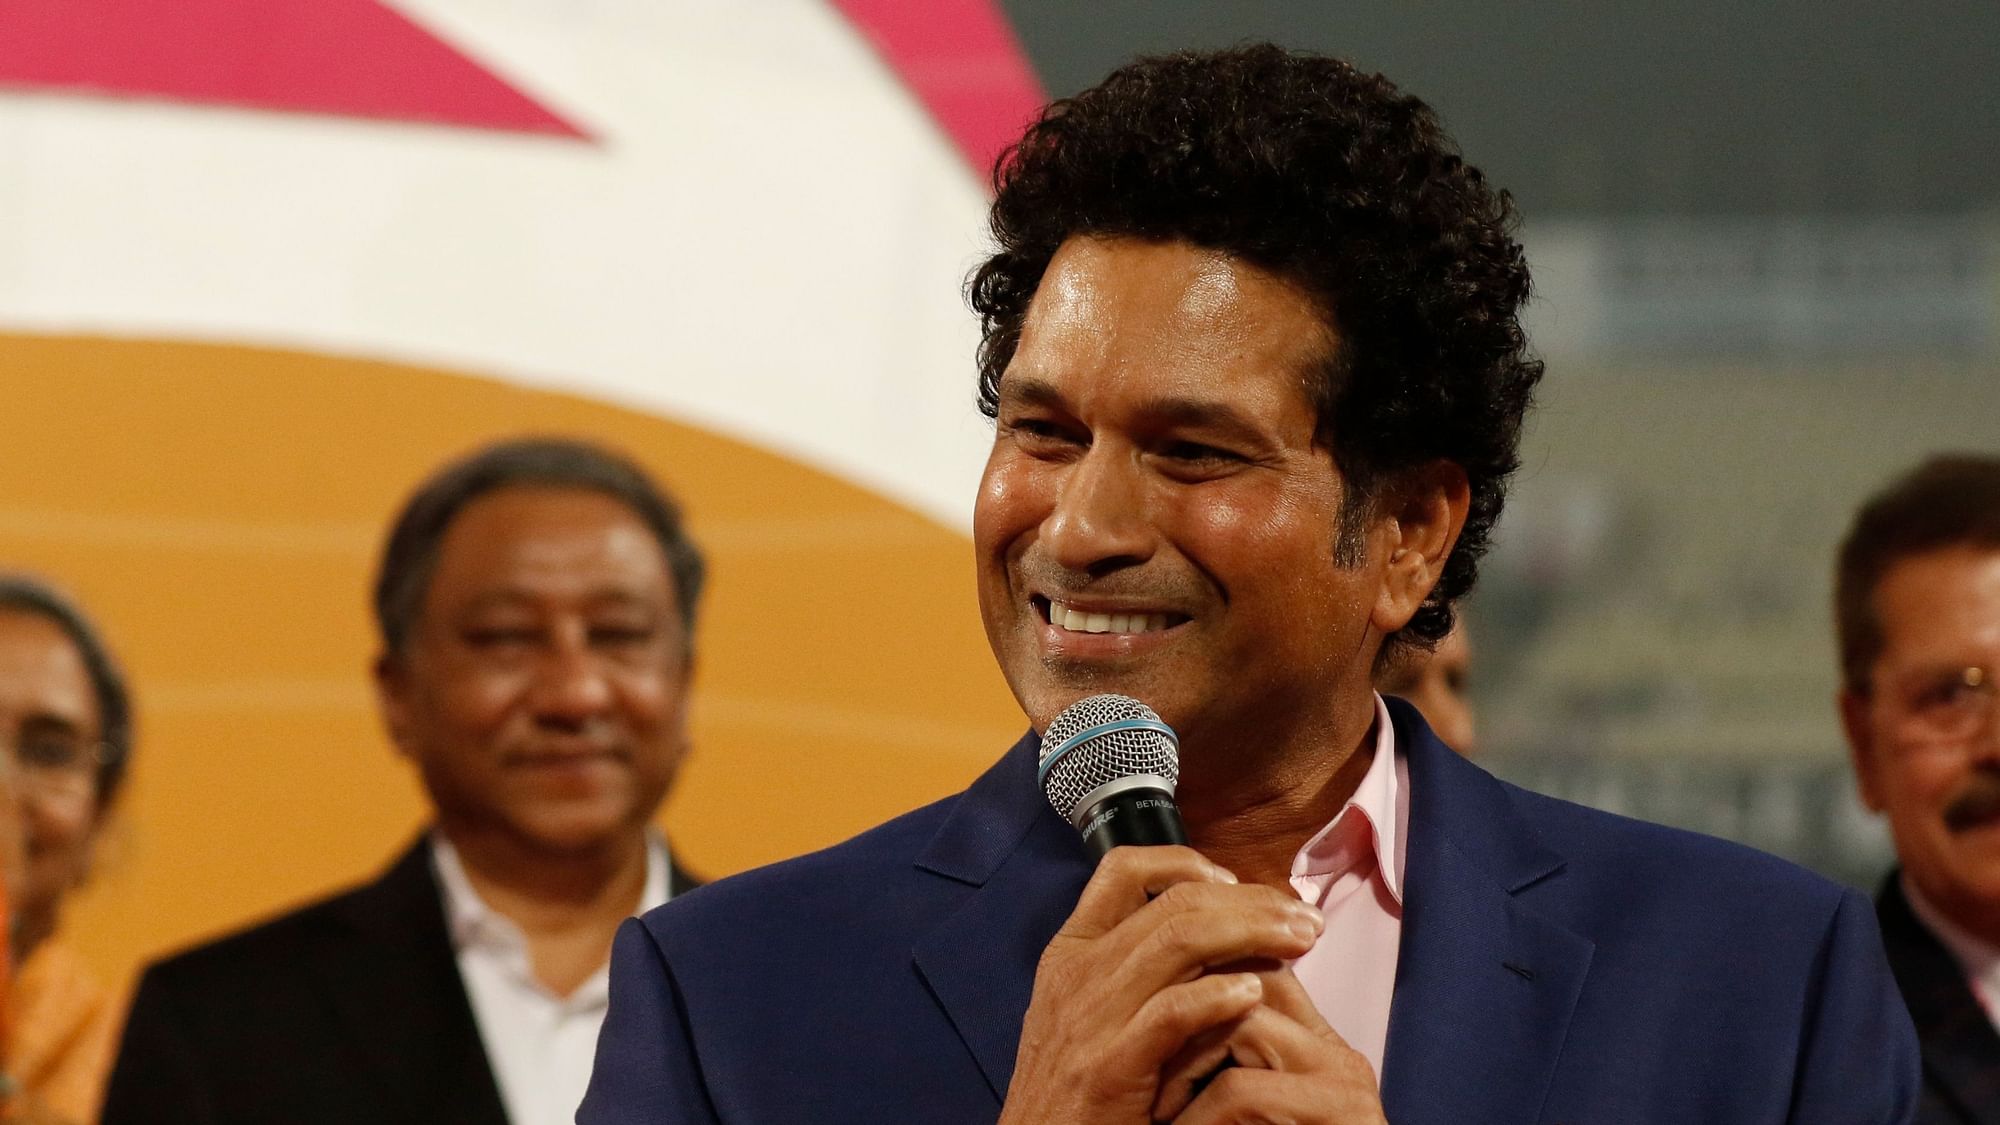 Cricket legend Sachin Tendulkar feels the upcoming decade starting Wednesday, 1 January should be about children and allowing them to express freely without fear as they are our future.